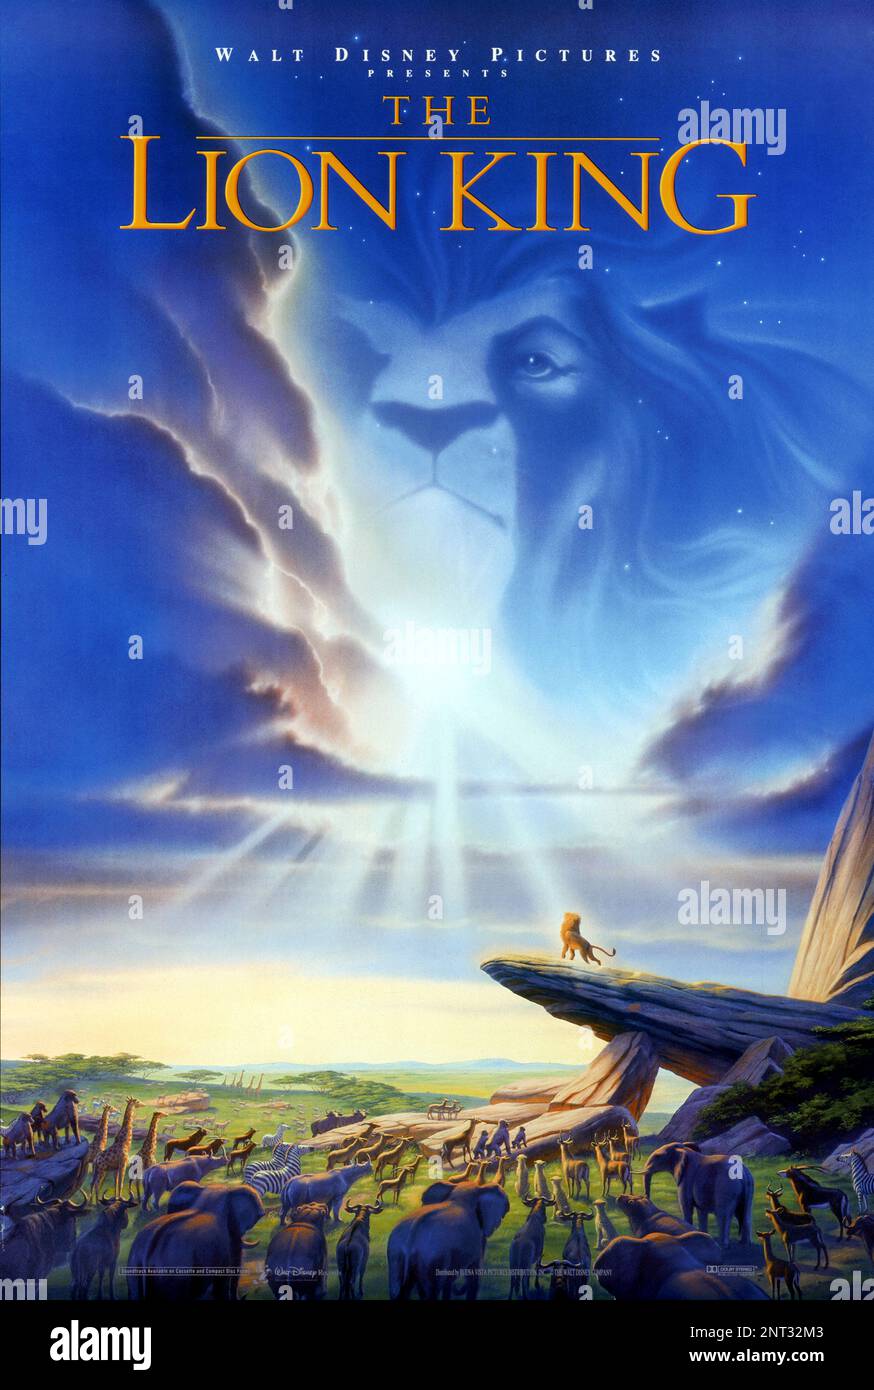 The Lion King poster Stock Photo